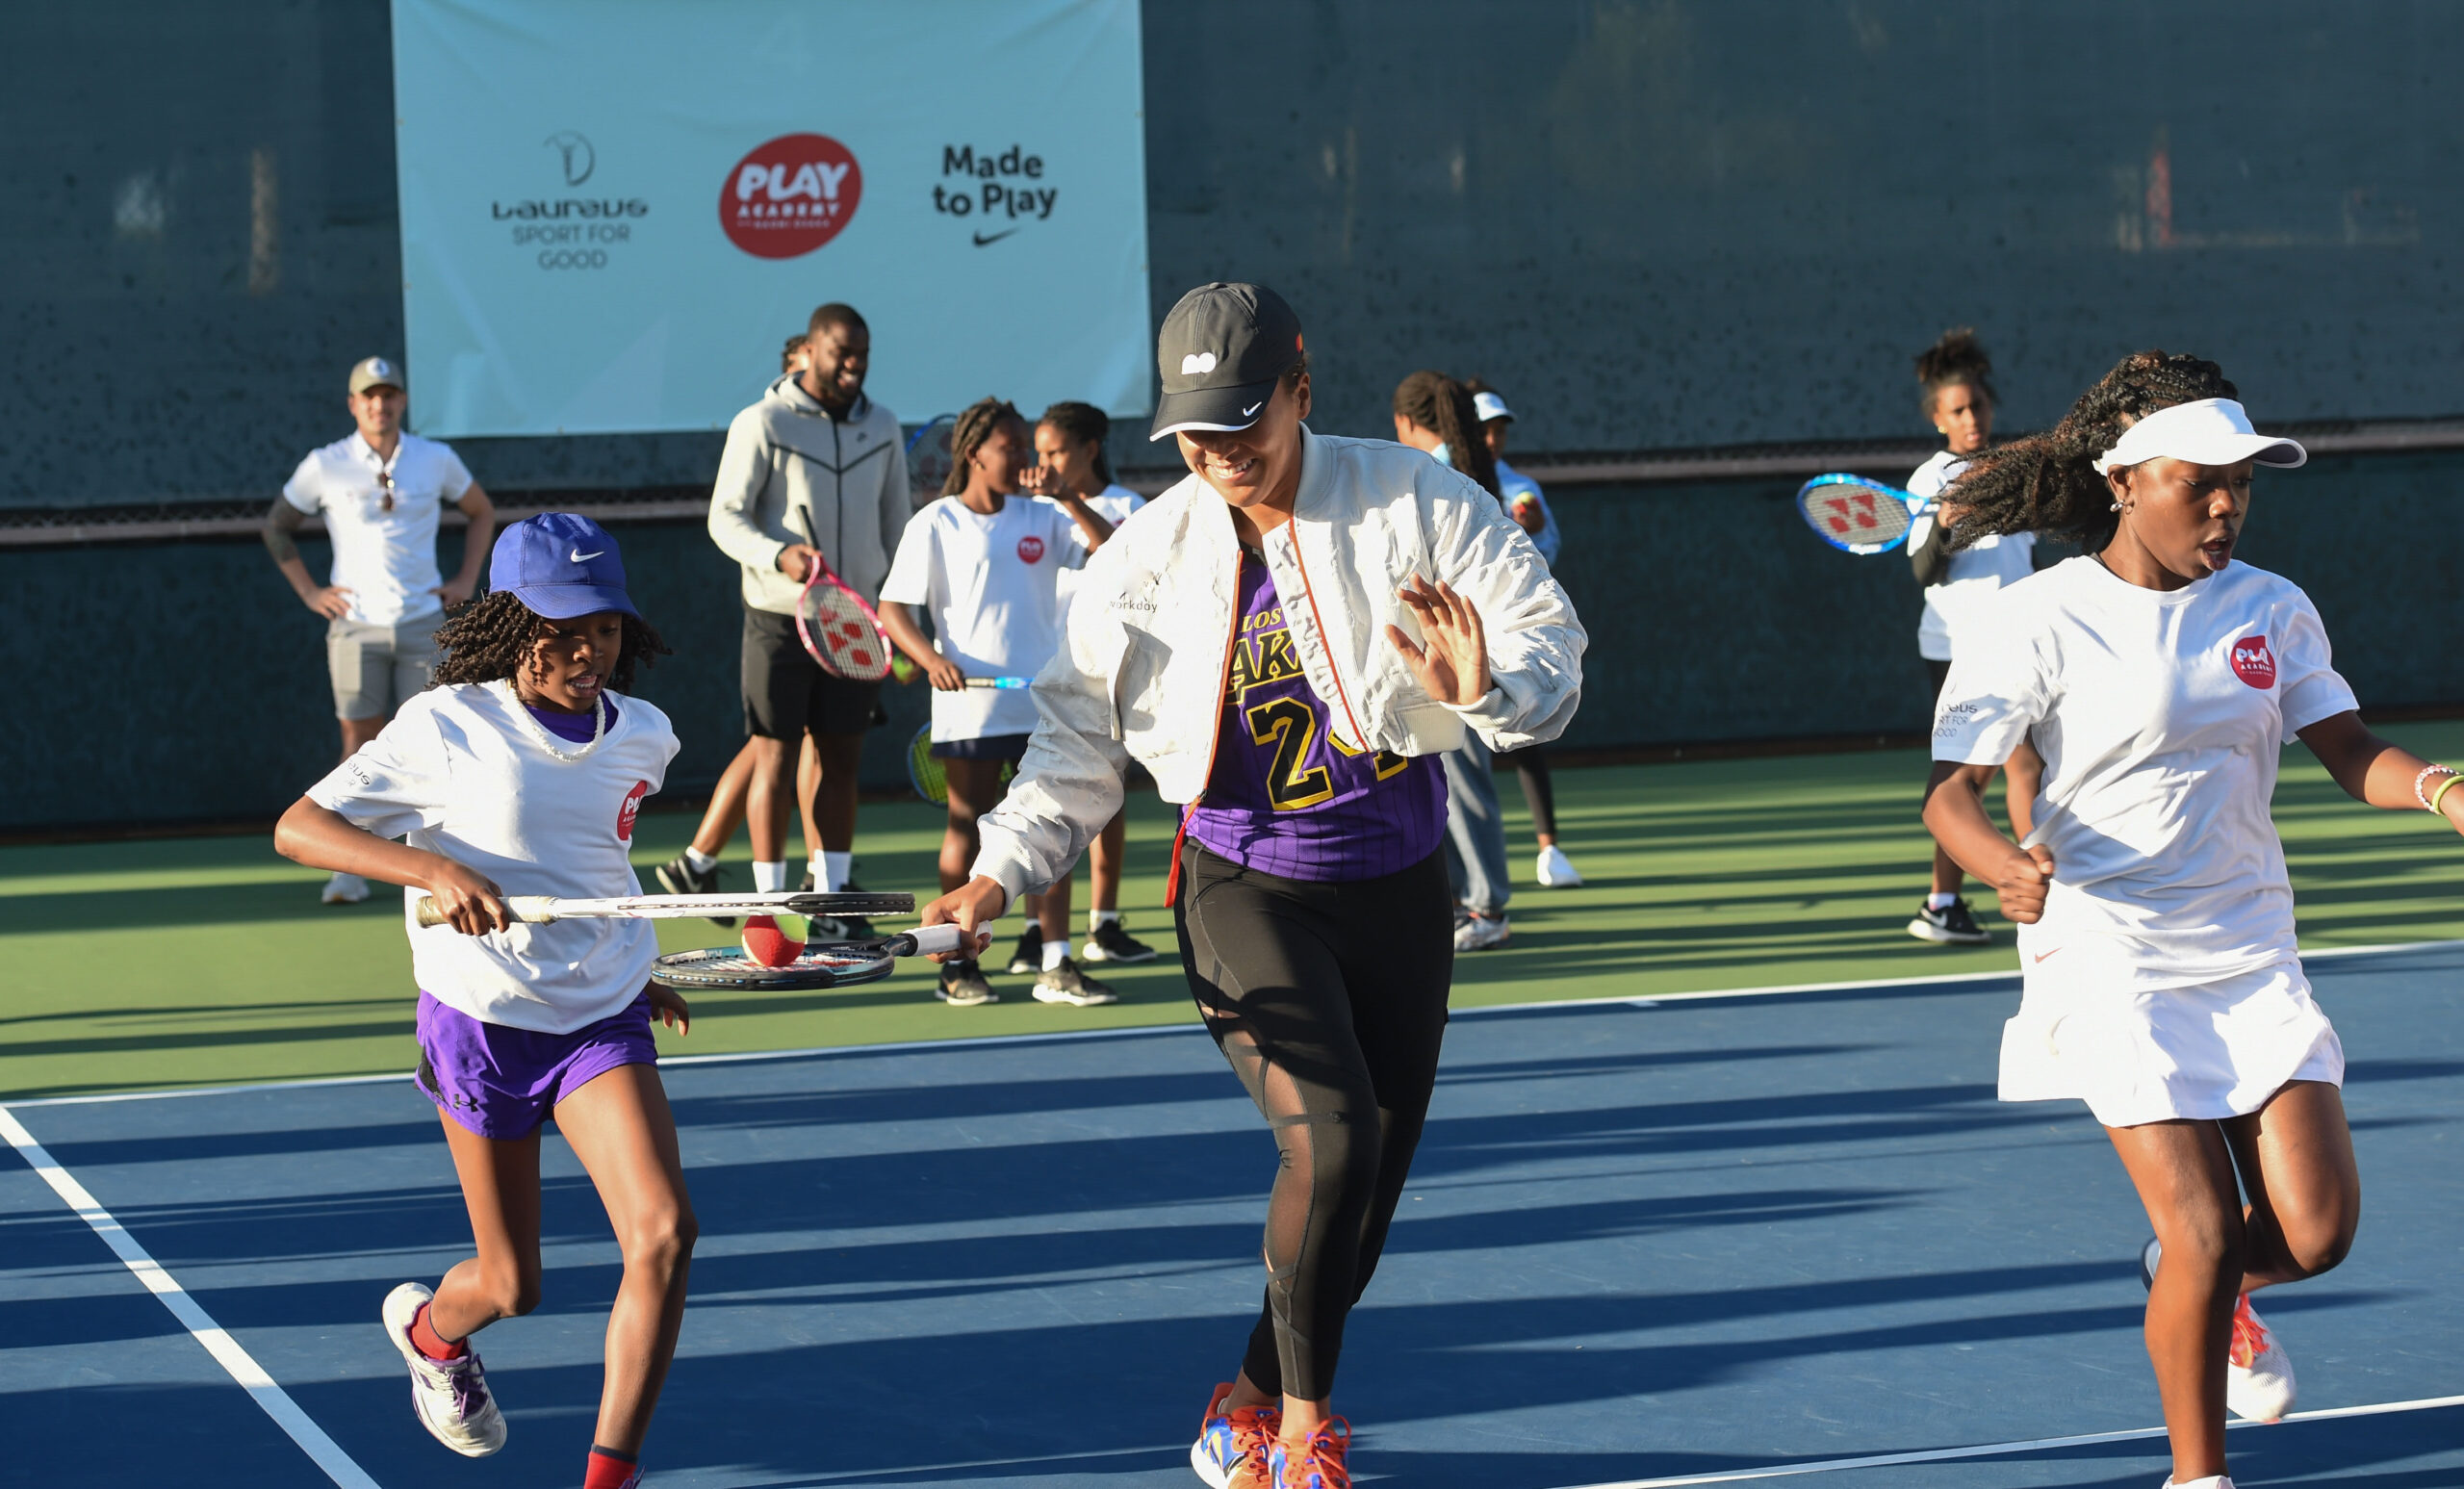 Naomi Osaka participates in tennis activity with girls